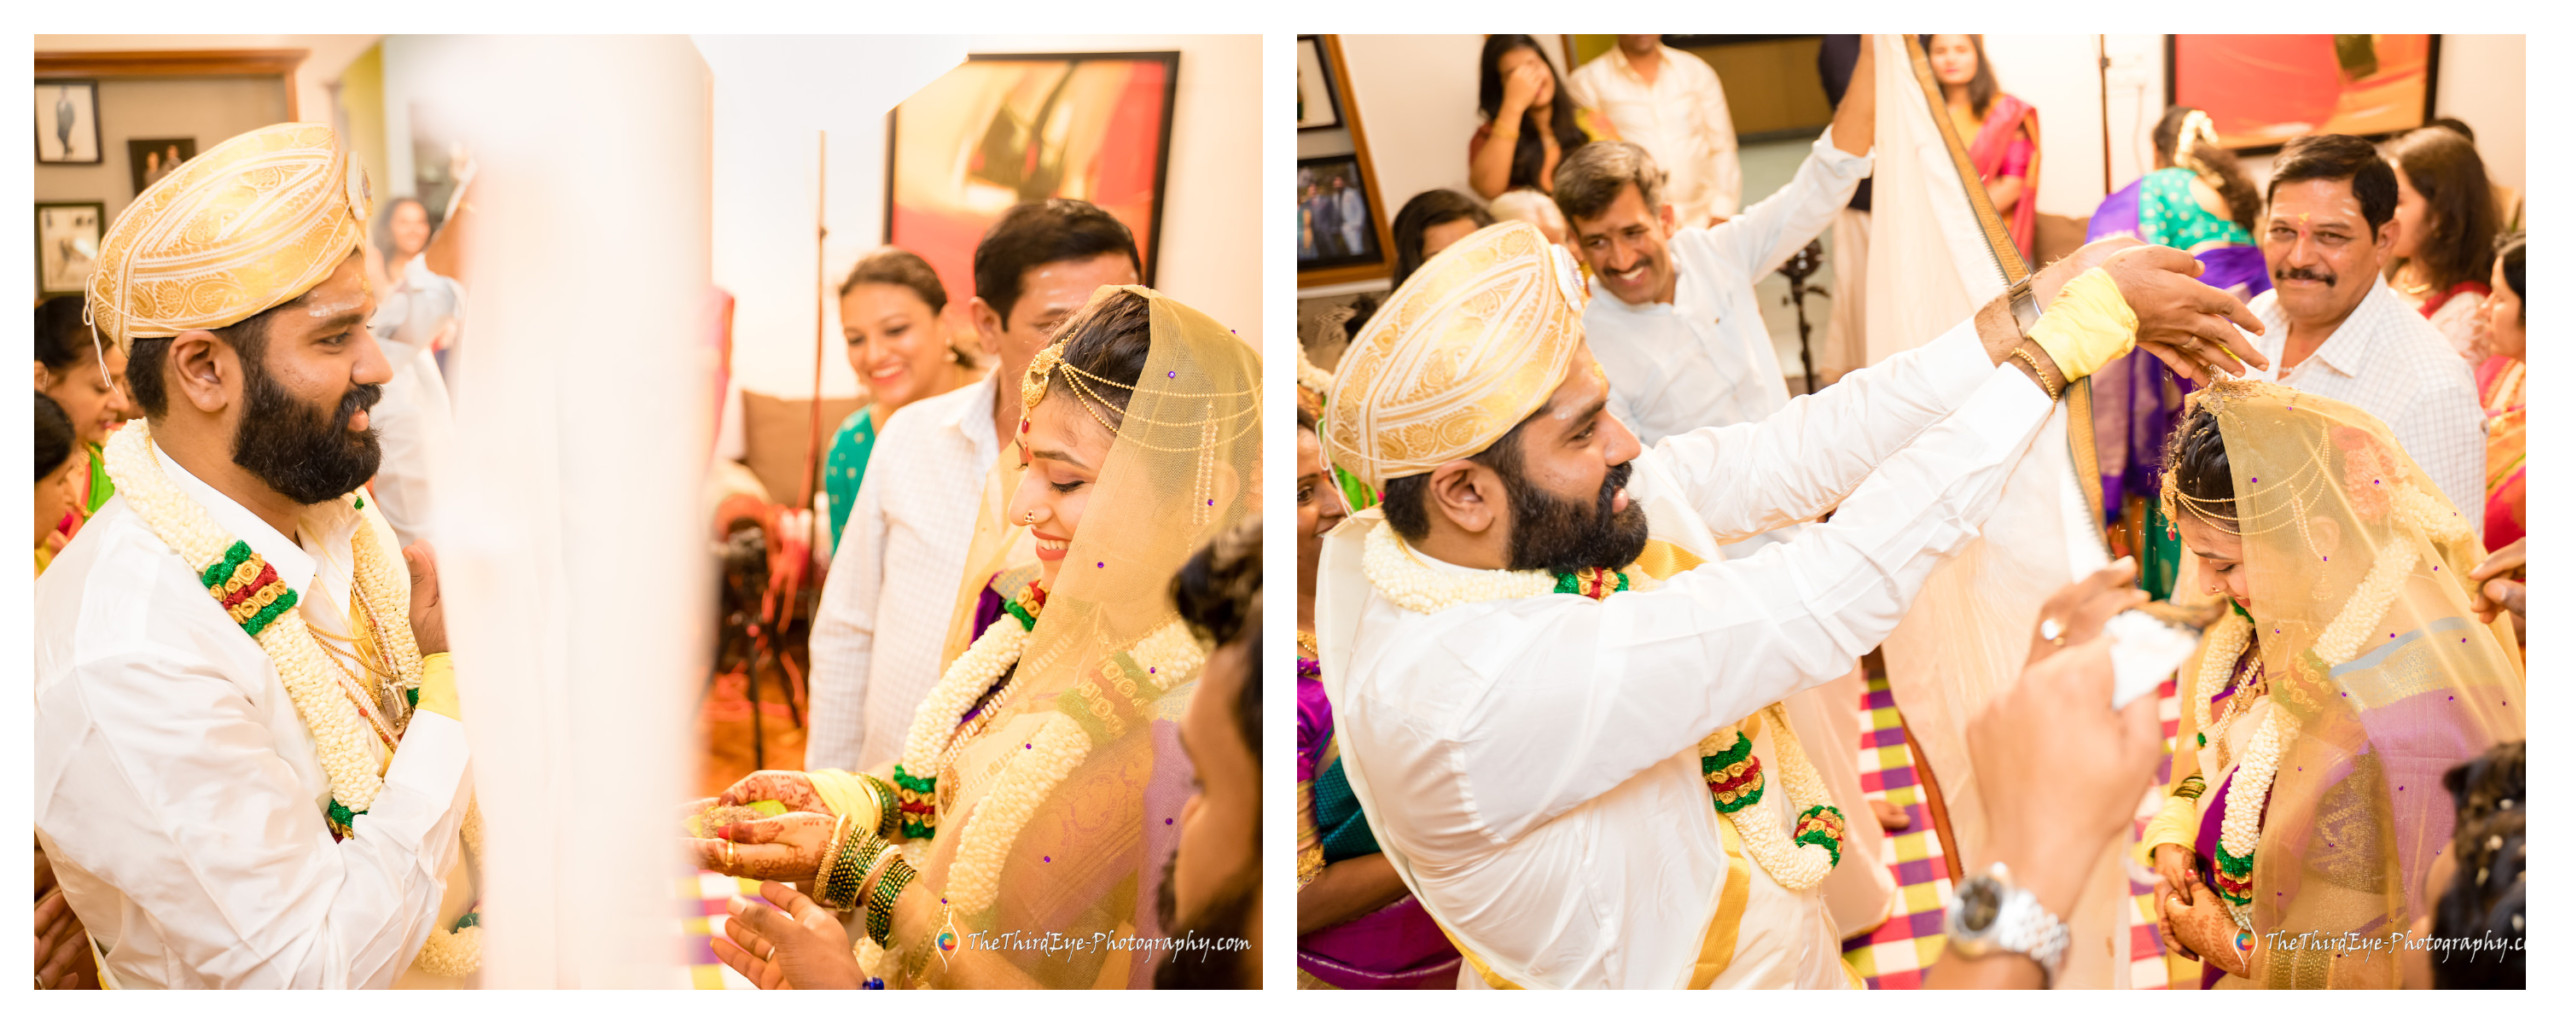 bride-groom-couple-happy-firstlook-beautiful-wedding-photos-recommendations-Best-South-indian-Candid-photographer-Covid-19